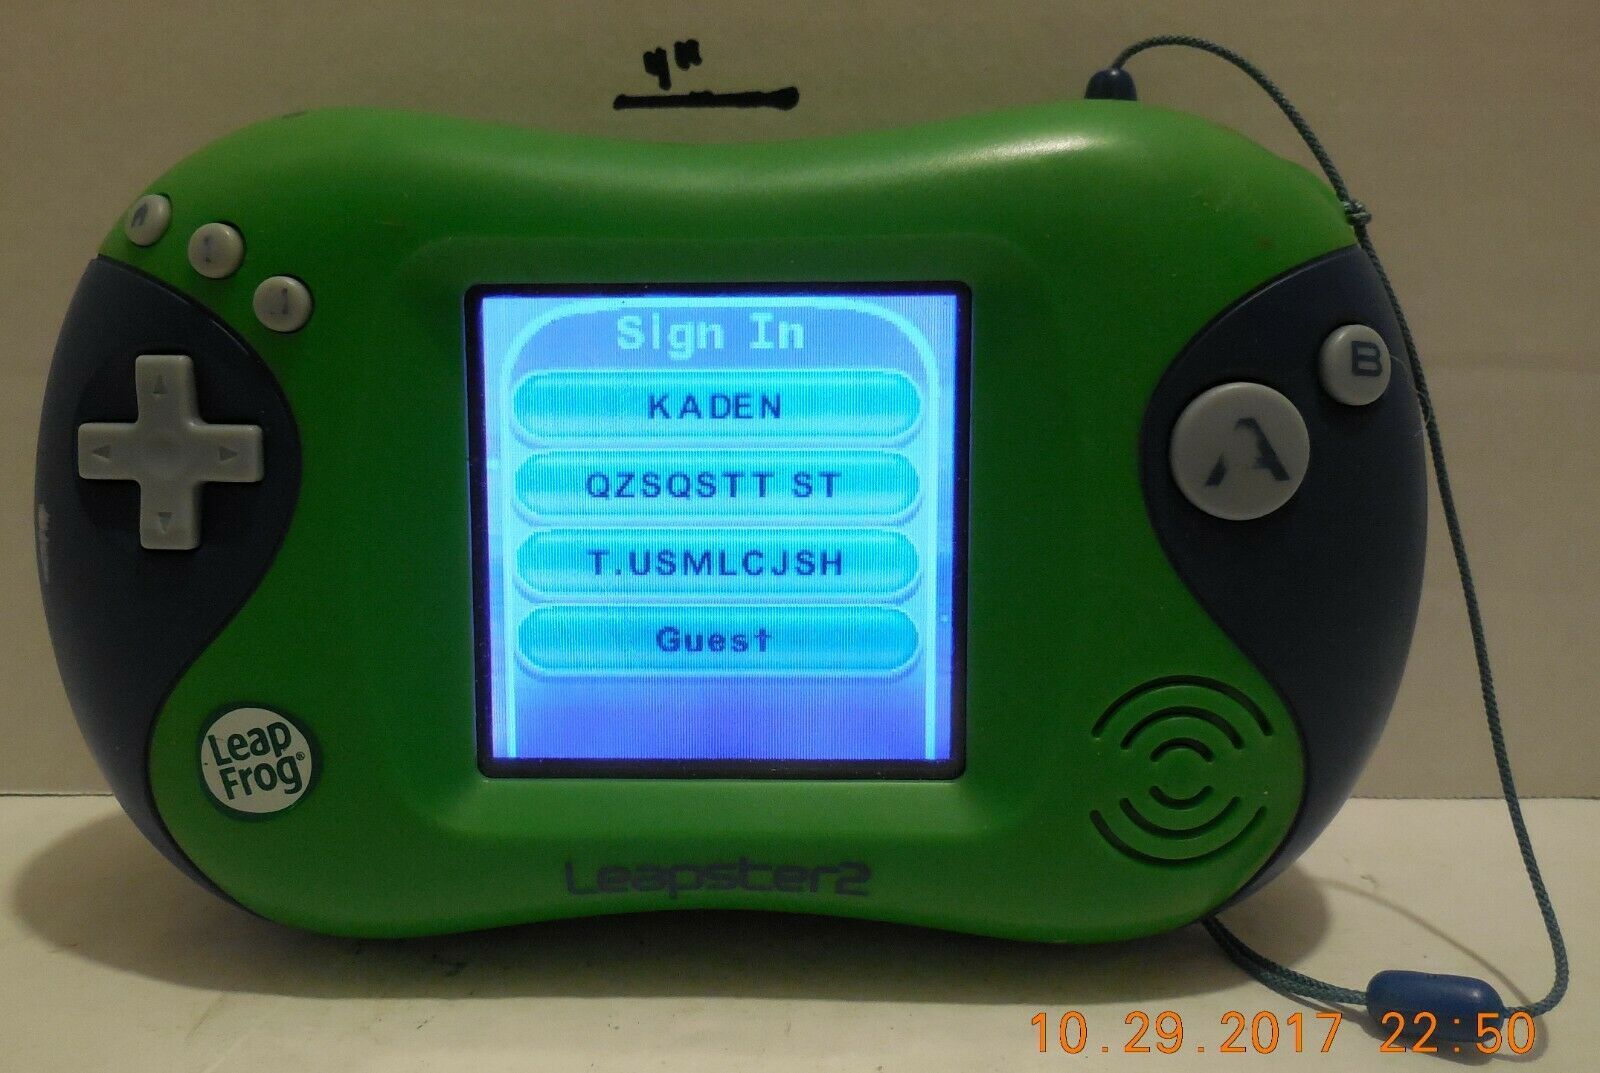 Leapfrog Leapster 2 L Max Game Buy 4 Get One Free Word Chasers Free Shipping 